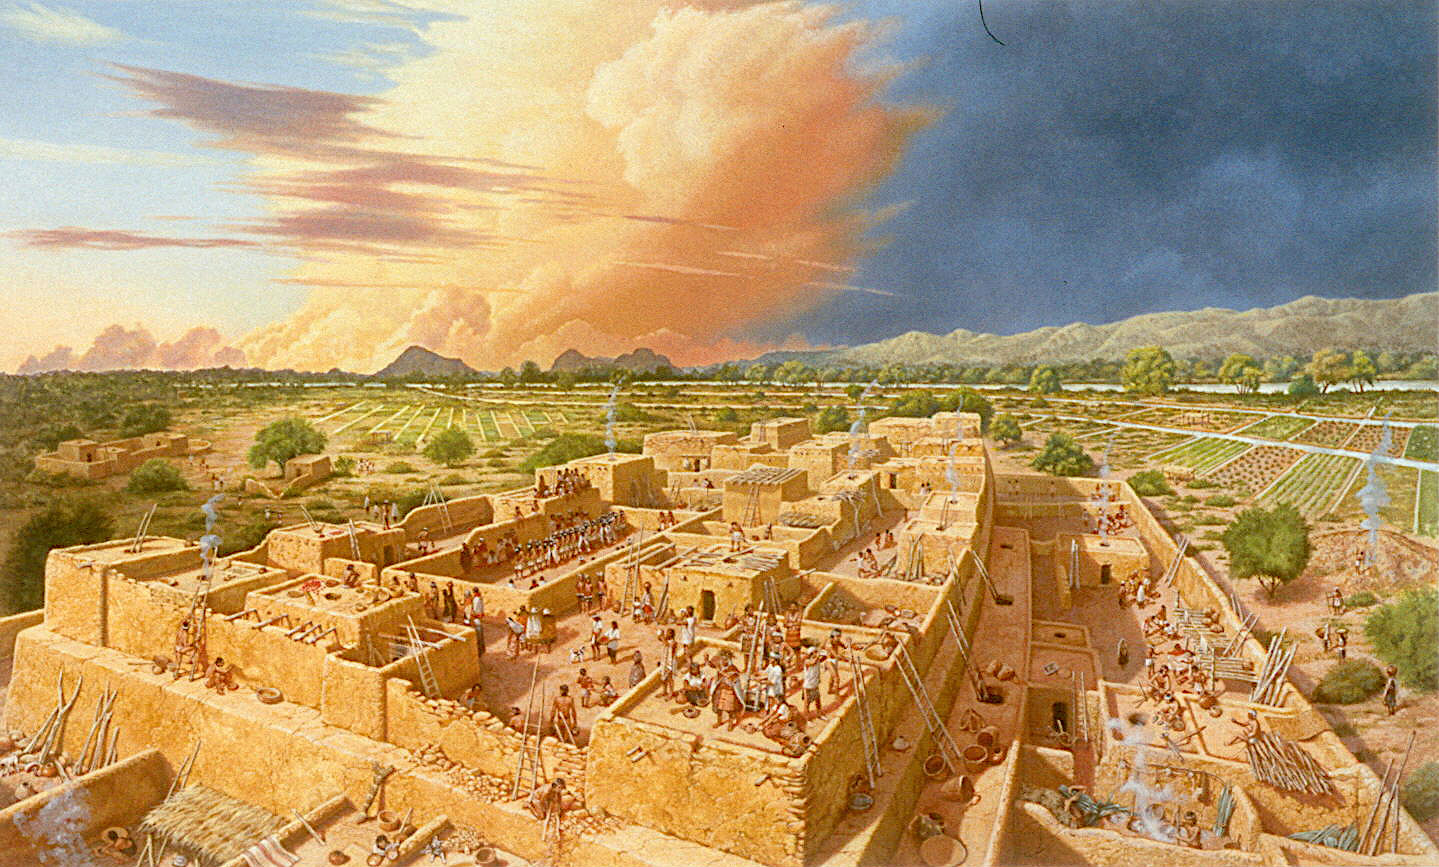 Illustration of ancient Hohokam Native American pueblo village with farms in the background.